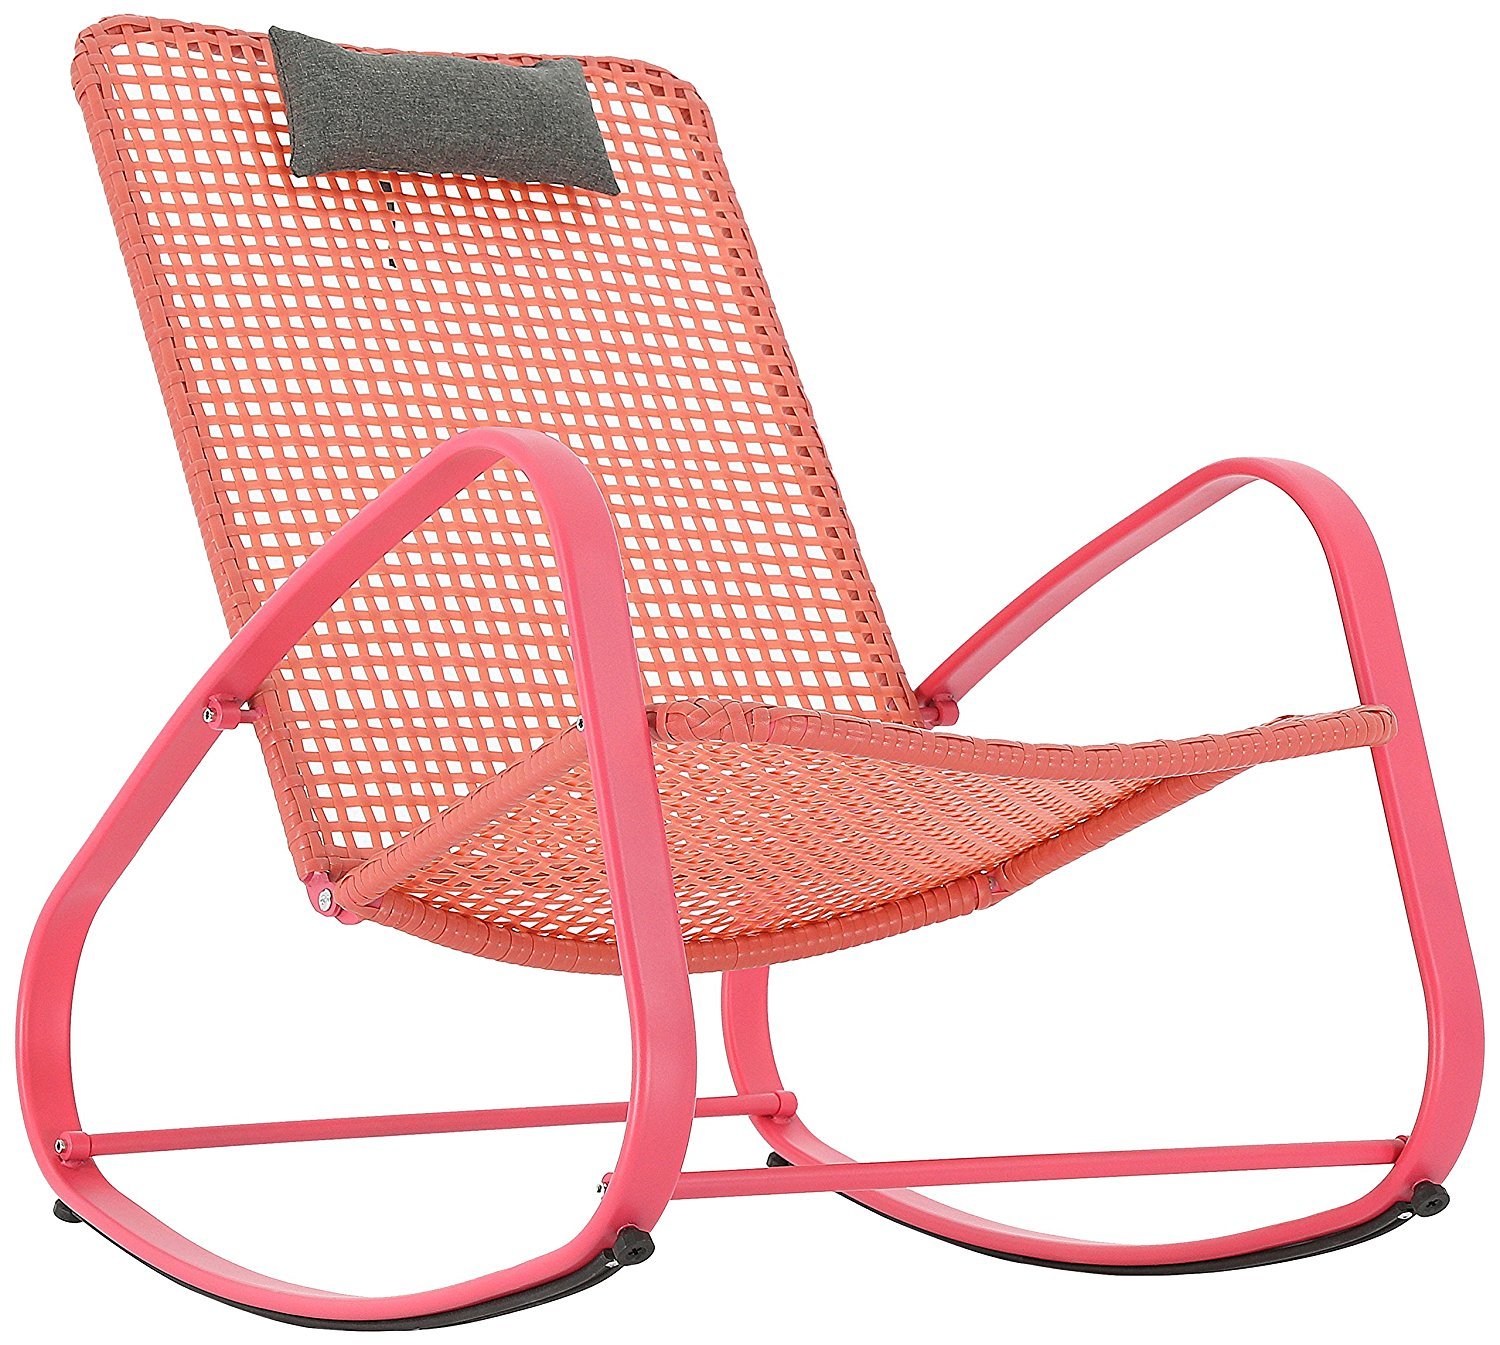 Colorful Amazon Patio Picks That Won’t Break The Bank /// By Design Fixation #patio #shopping #colorful